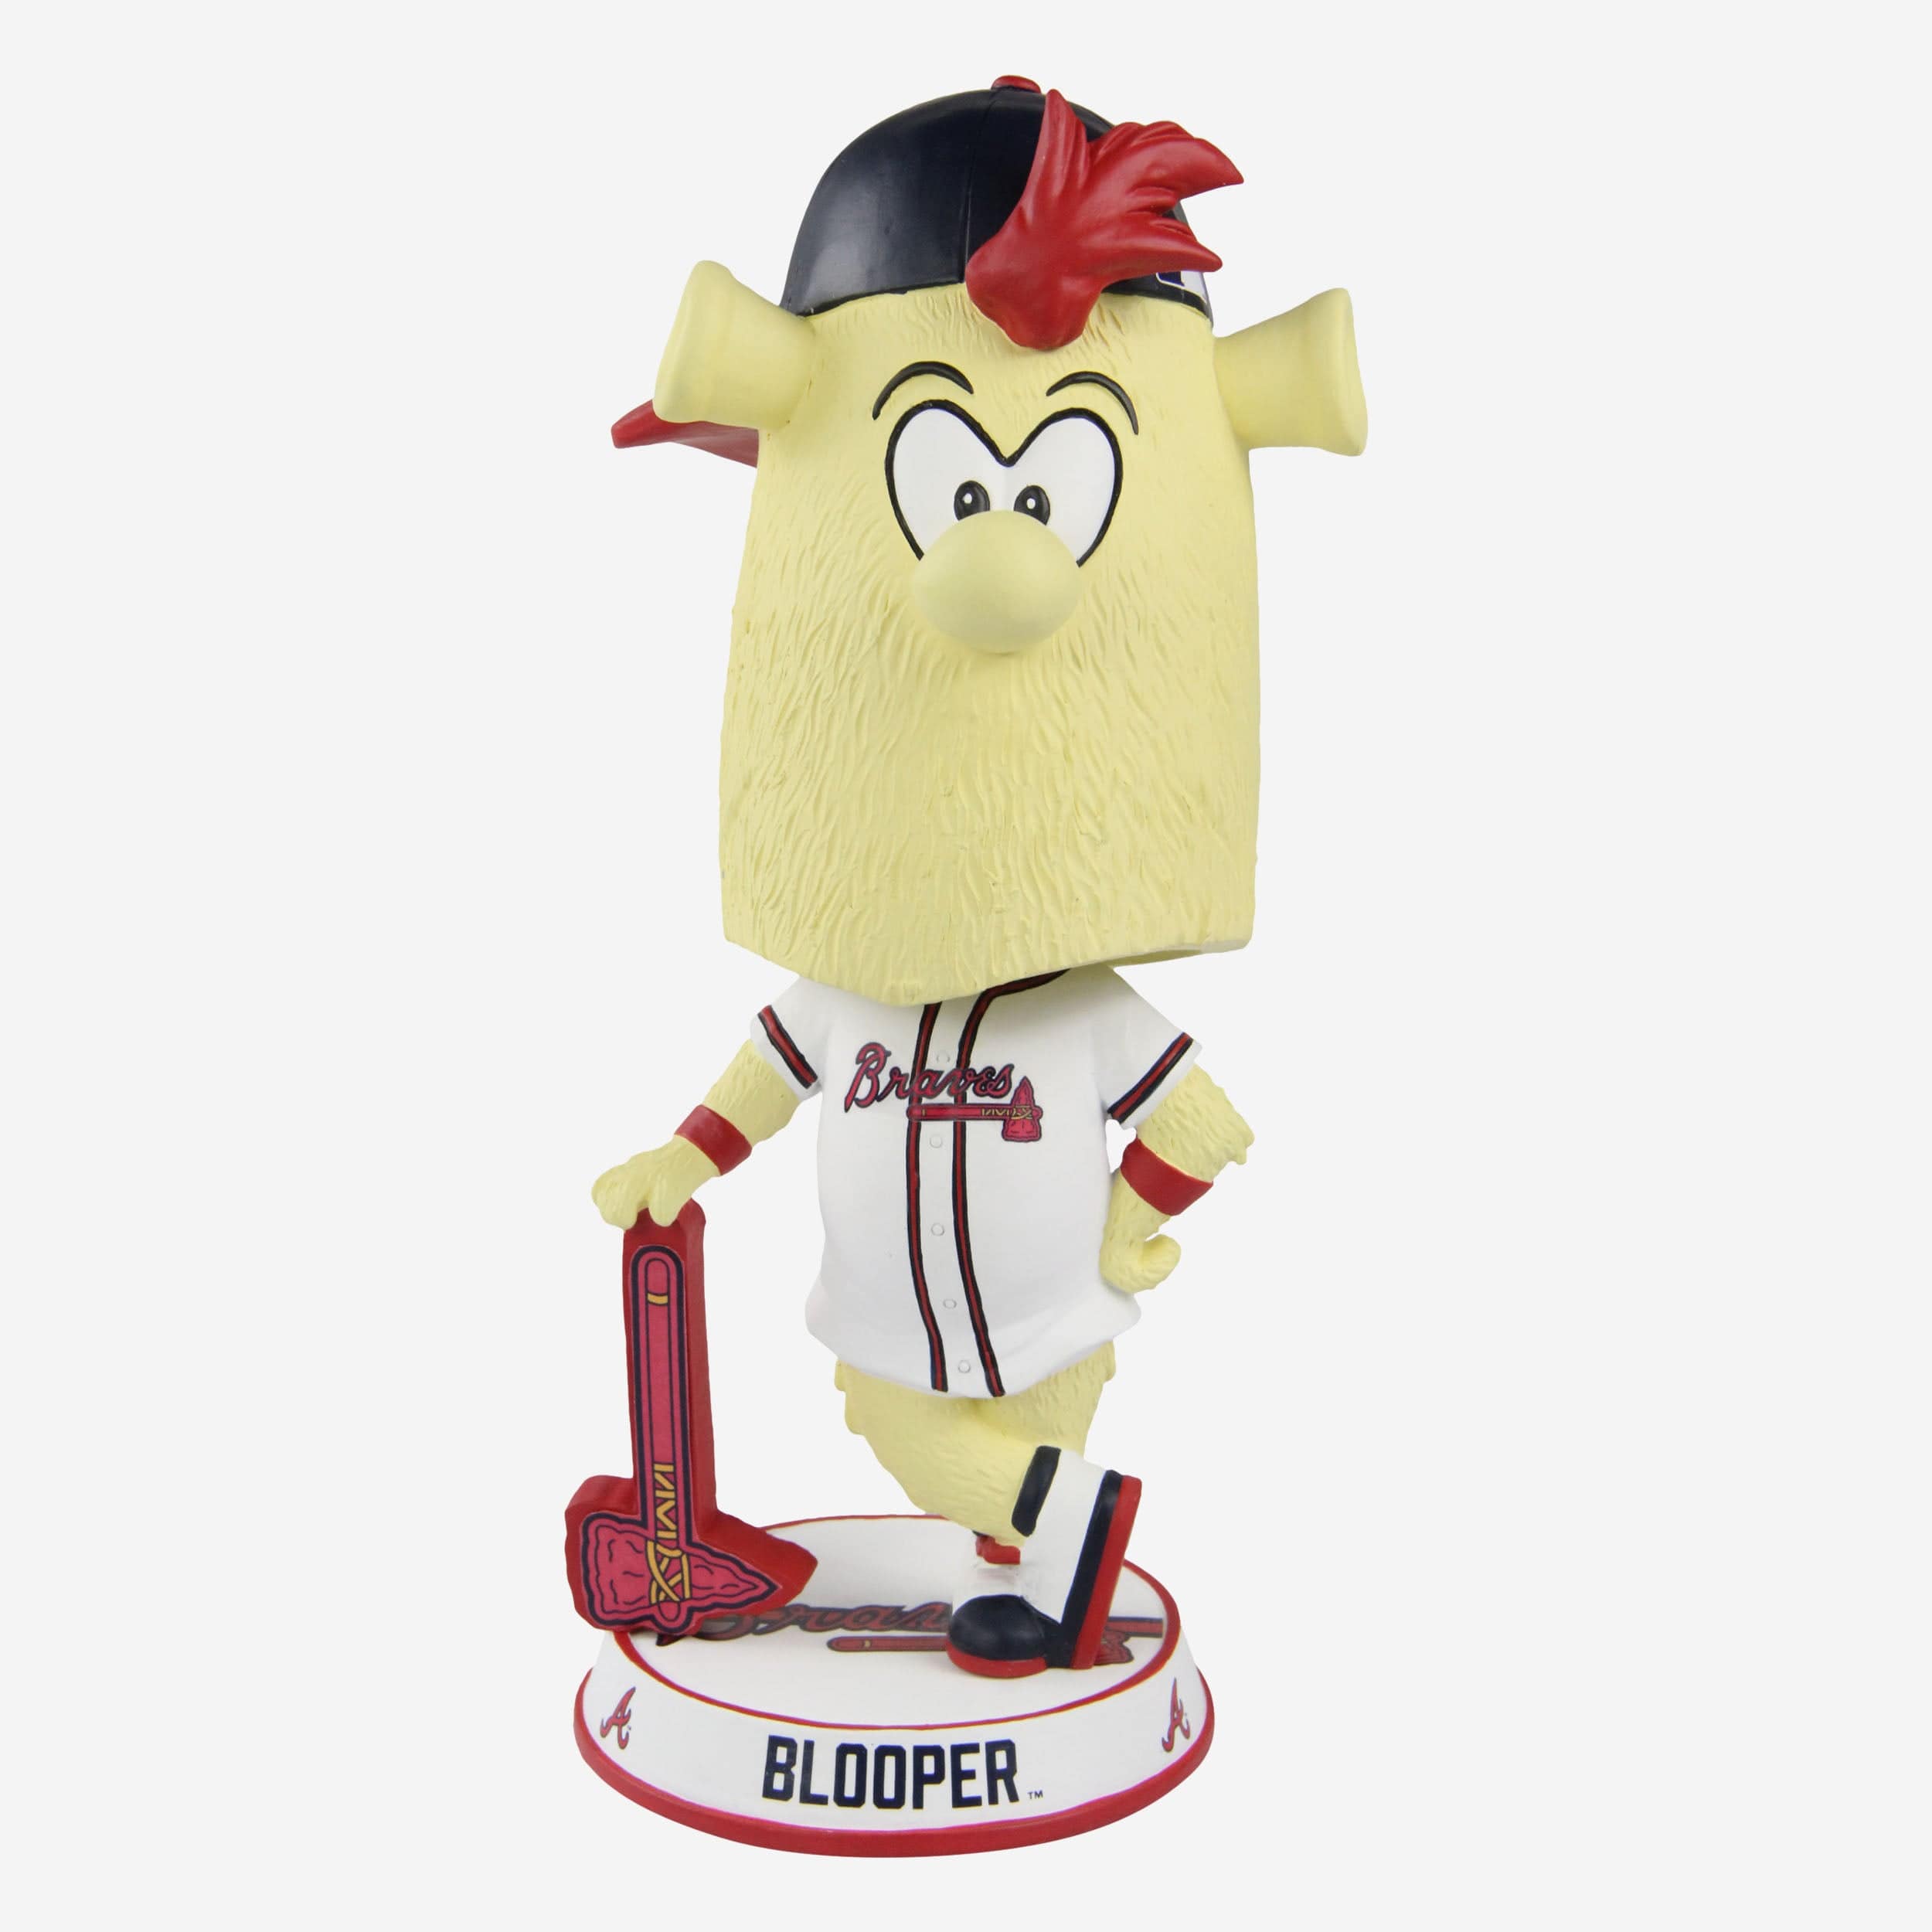 Braves mascot Blooper smashes his own bobblehead to win $500